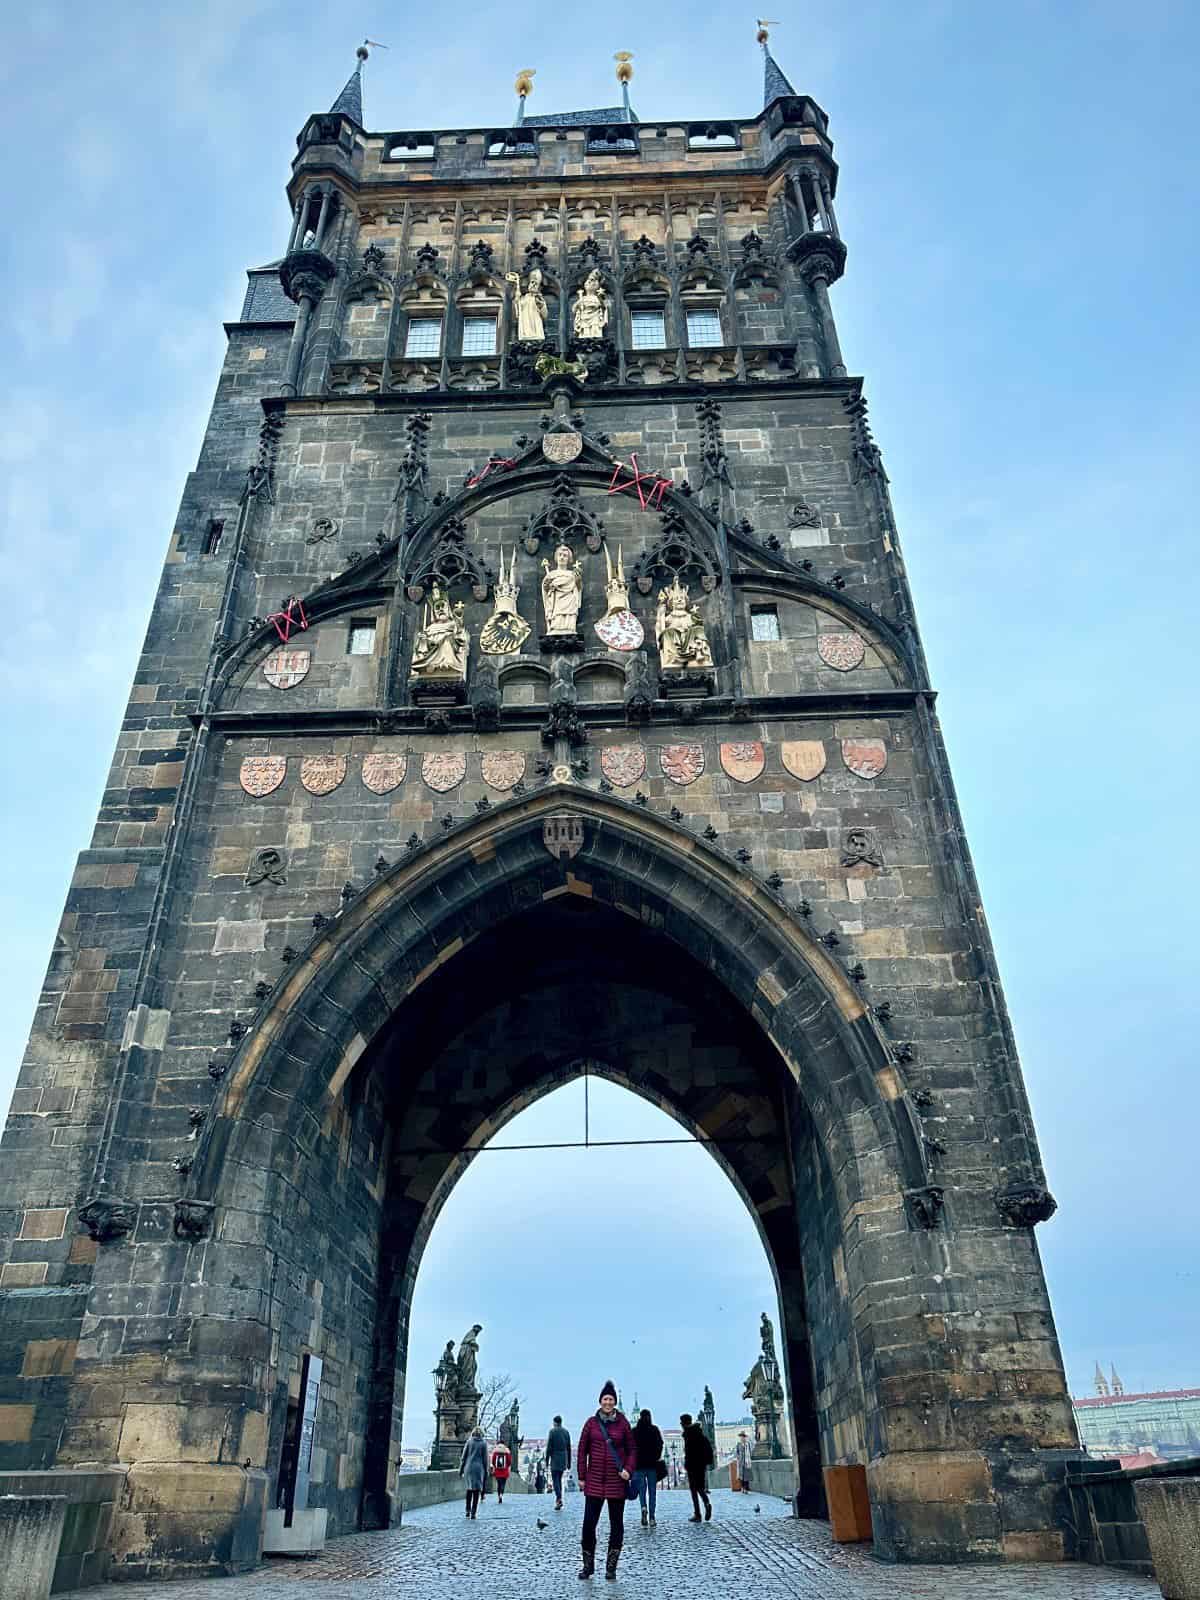 What to do in winter in Prague - you can have Charles Bridge to yourself early in the morning